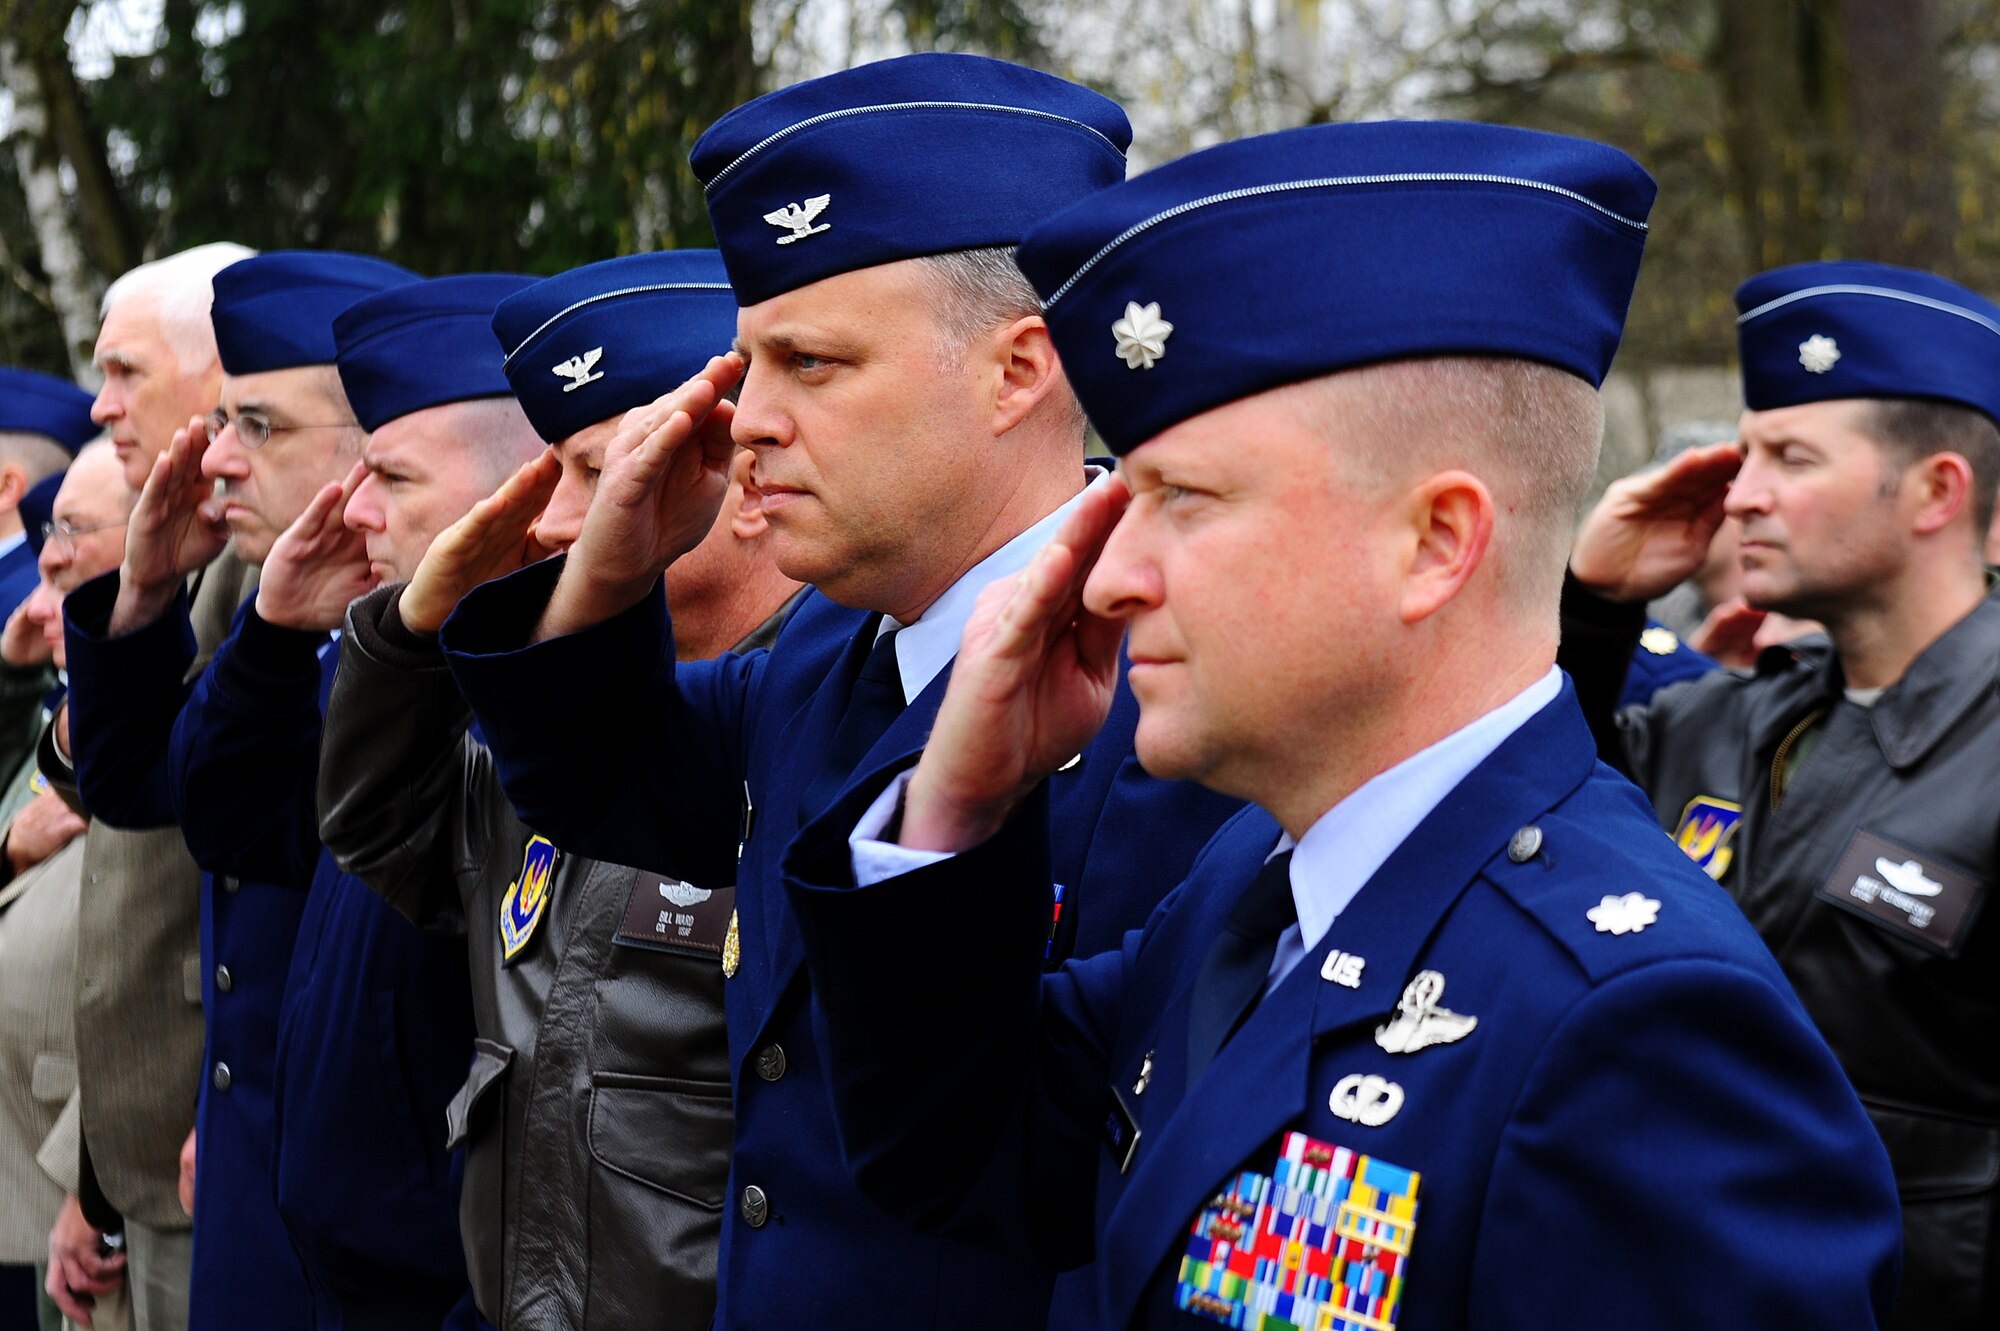 Ramstein leaders salute during a memorial ceremony on Ramstein Air Base, Germany, April 5, 2012. On April 3, 1996, a CT-43 aircraft that was assigned to the 76th Airlift Squadron crashed outside of Dubrovnik Croatia during a peacekeeping mission. The squadron honored the six crew members of flight IFO-21 this year marking the 16th anniversary. (U.S. Air Force photo by Amn Brea Miller)